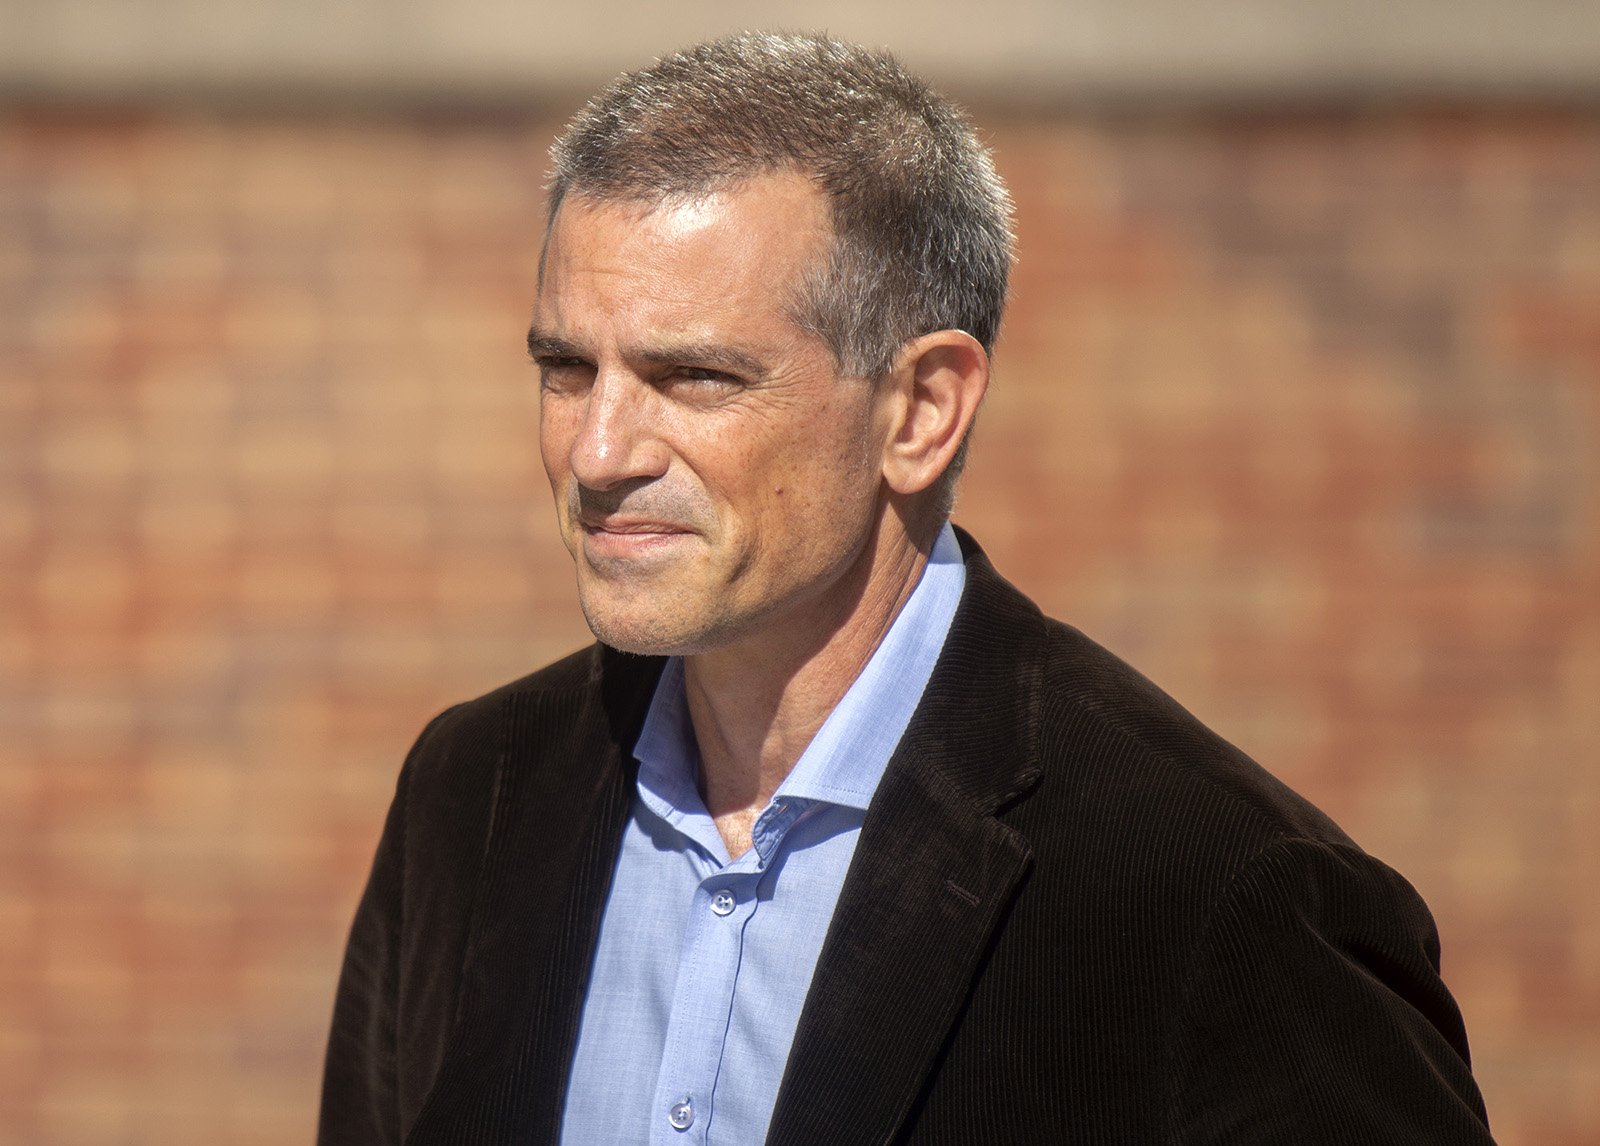 Fotis Dulos at the Stamford Superior Court on June 26, 2019, in Stamford, Connecticut.  | Source: Getty Images